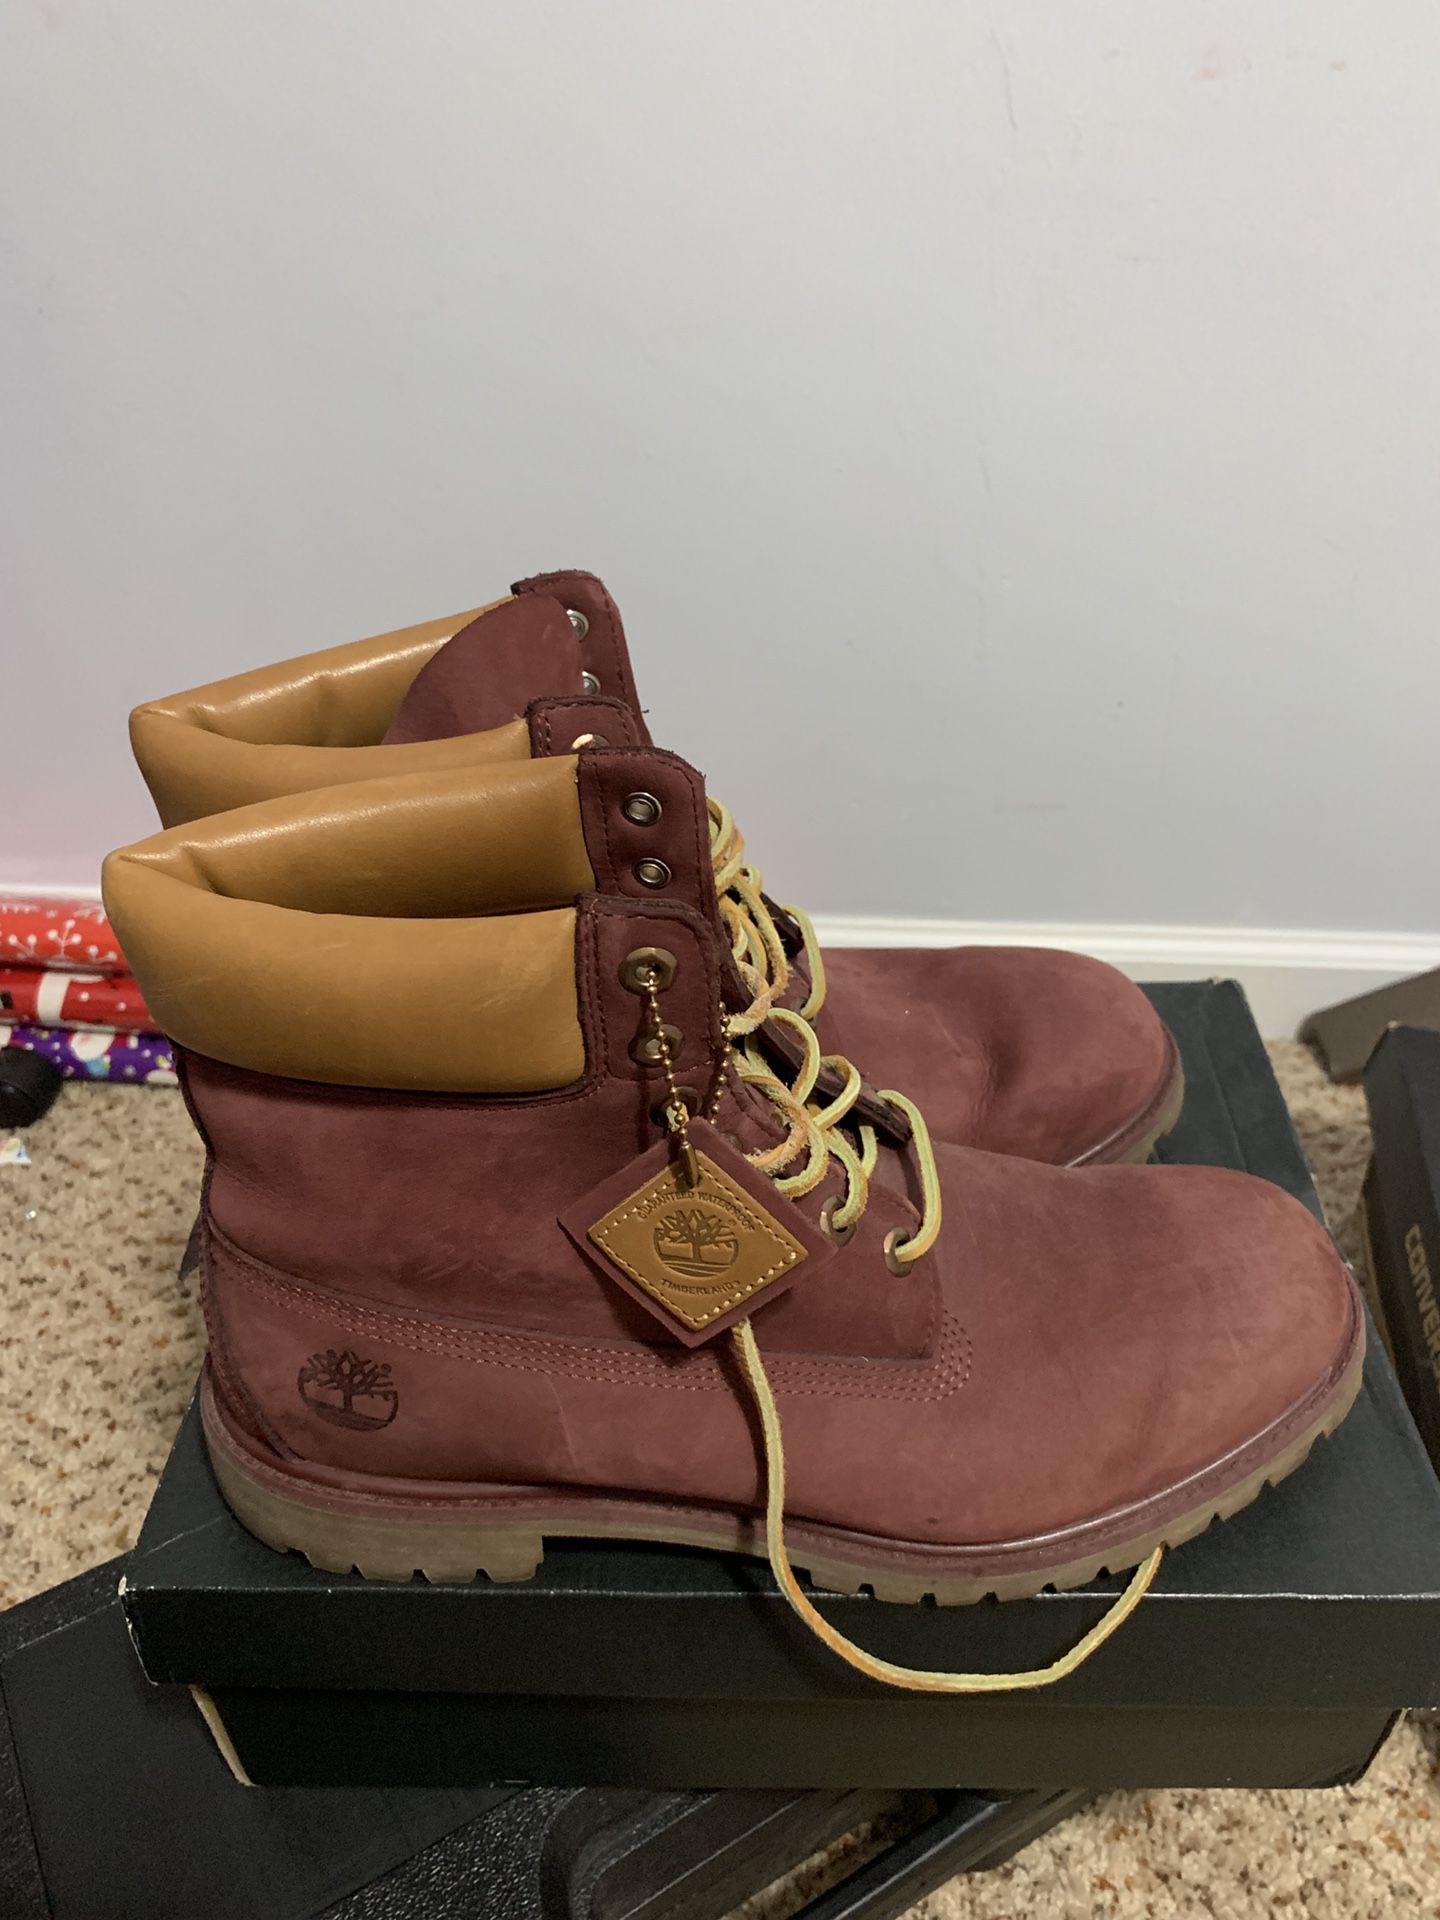 Boots men’s 12 like new